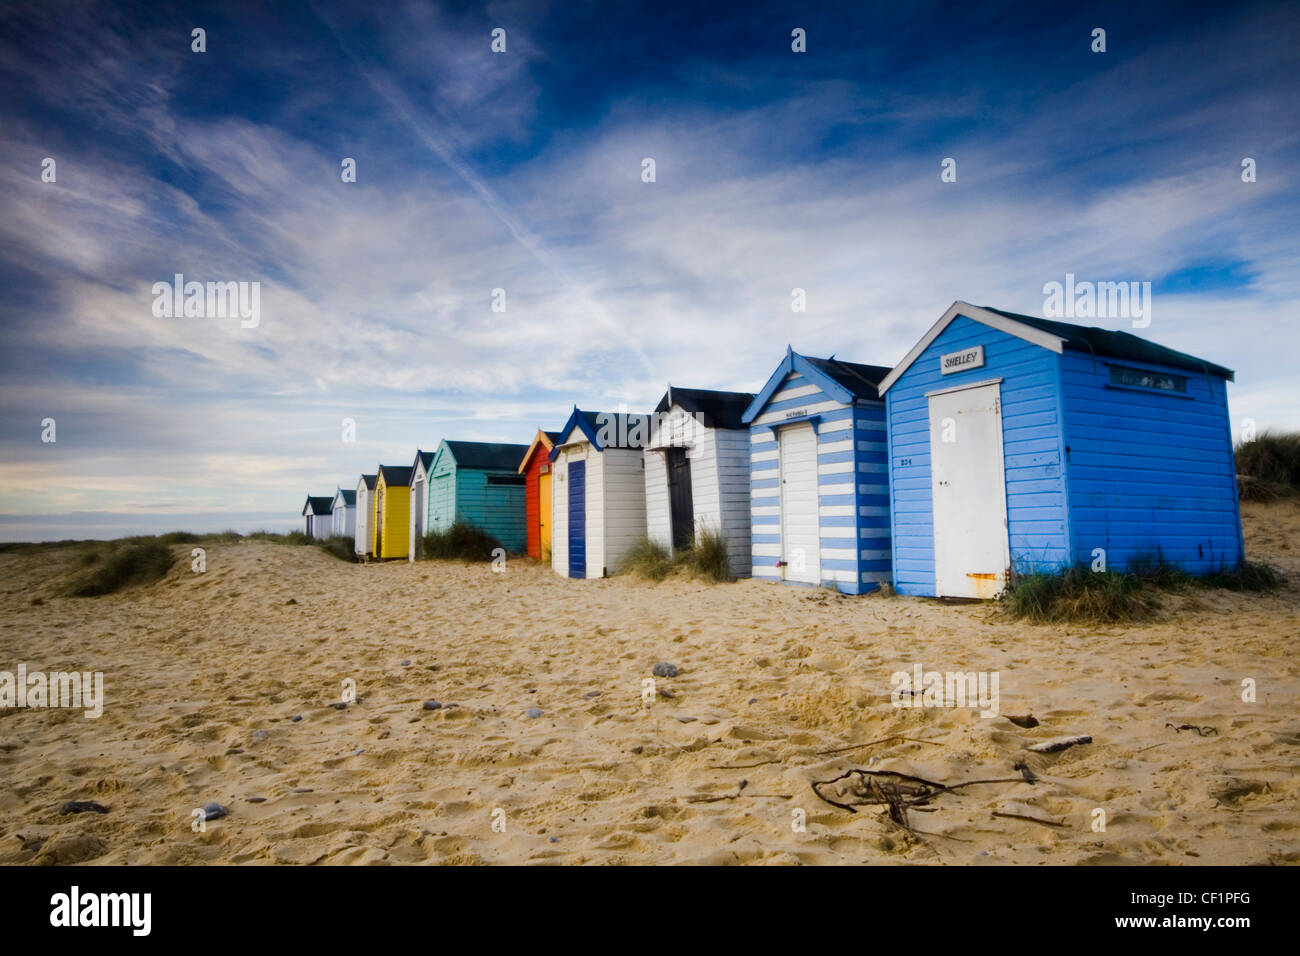 Beach huts at Southwold. The town has 300 beach huts which evolved from fishermen's huts and bathing huts, from where they progr Stock Photo